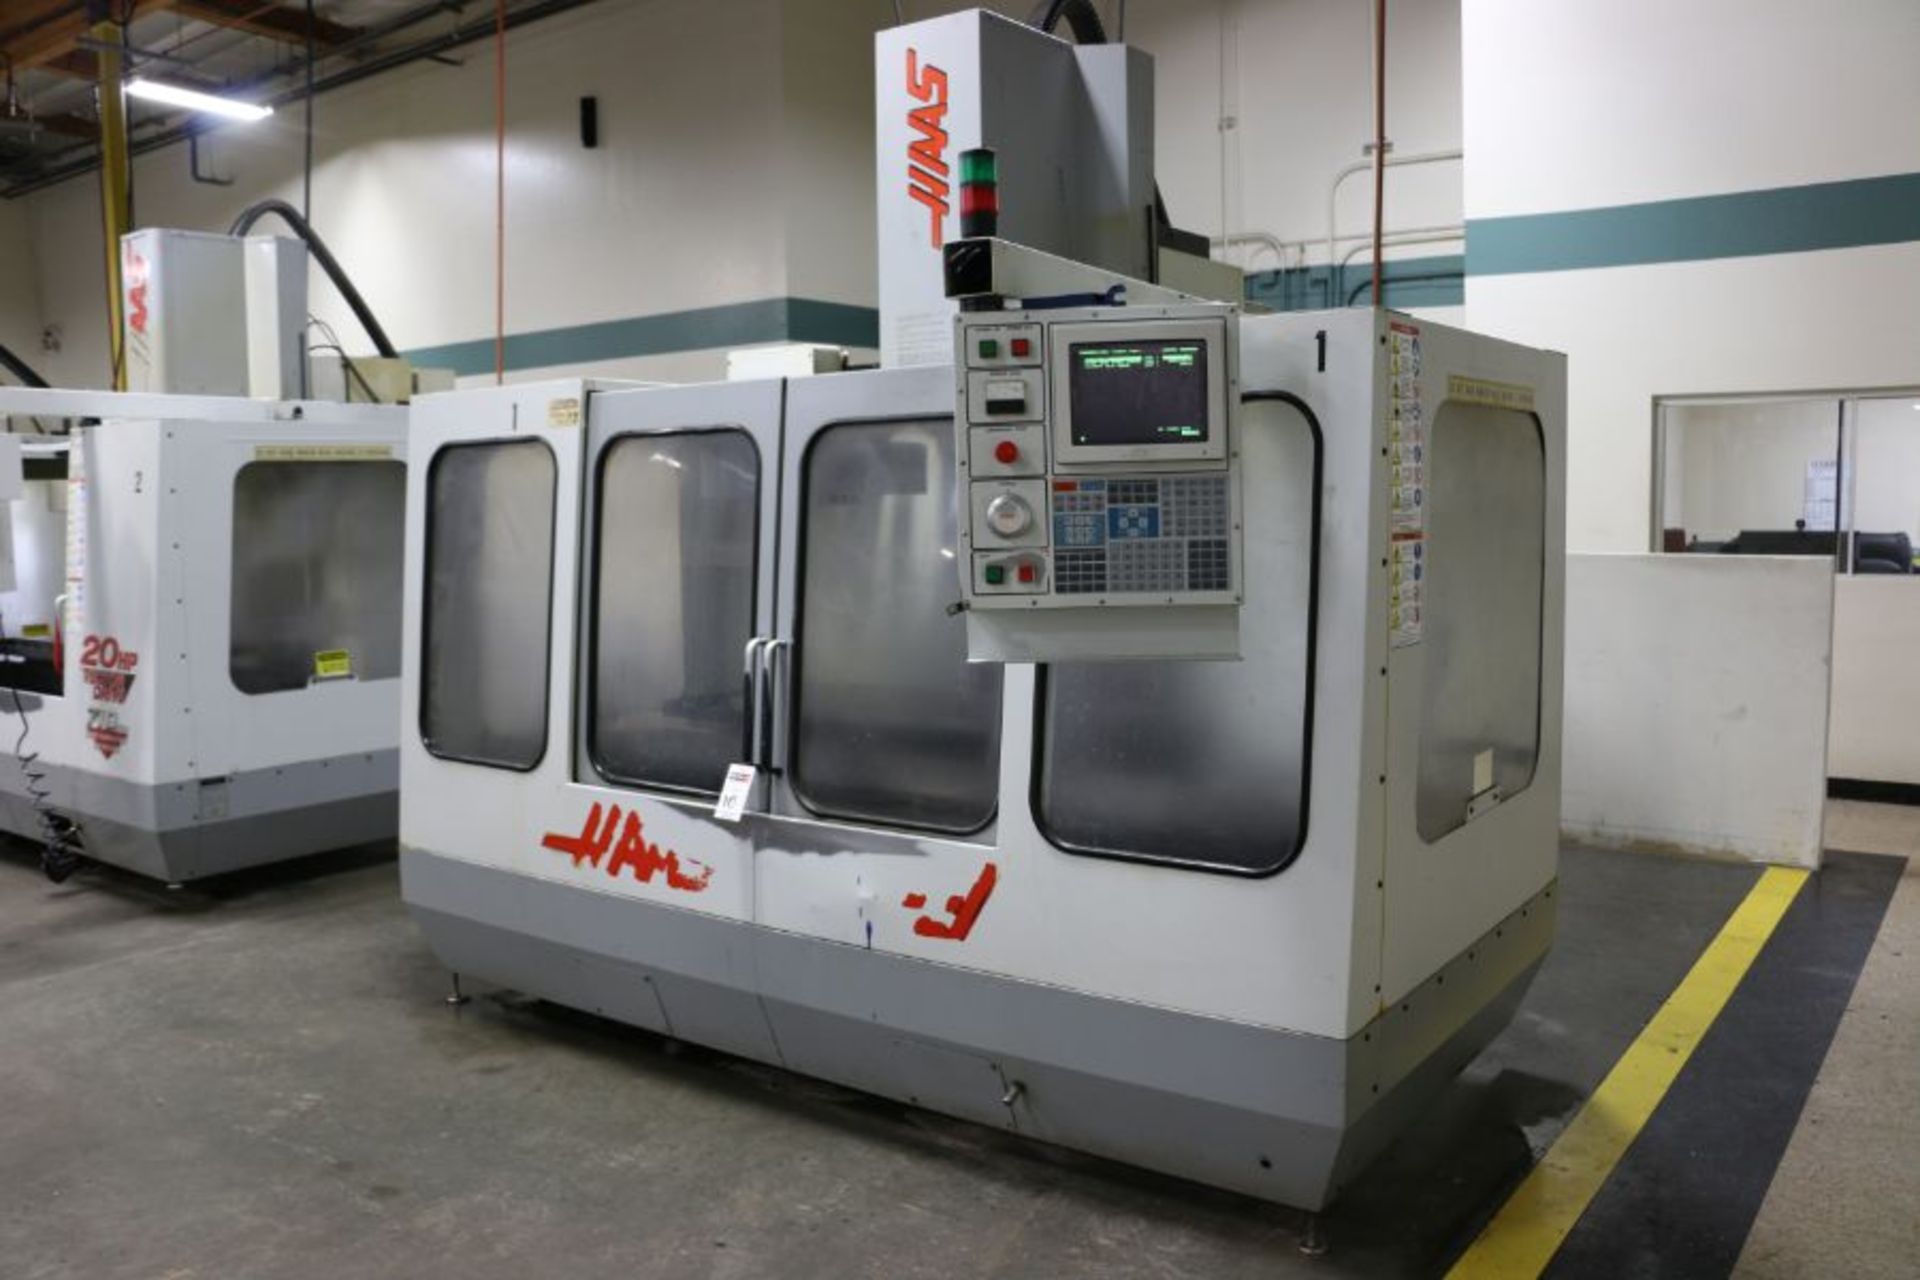 Haas VF-3, 40"x20"x20" Travels, 20 Position Tool Carousel, CT-40 Taper, s/n 4311, New 1995 - Image 3 of 11